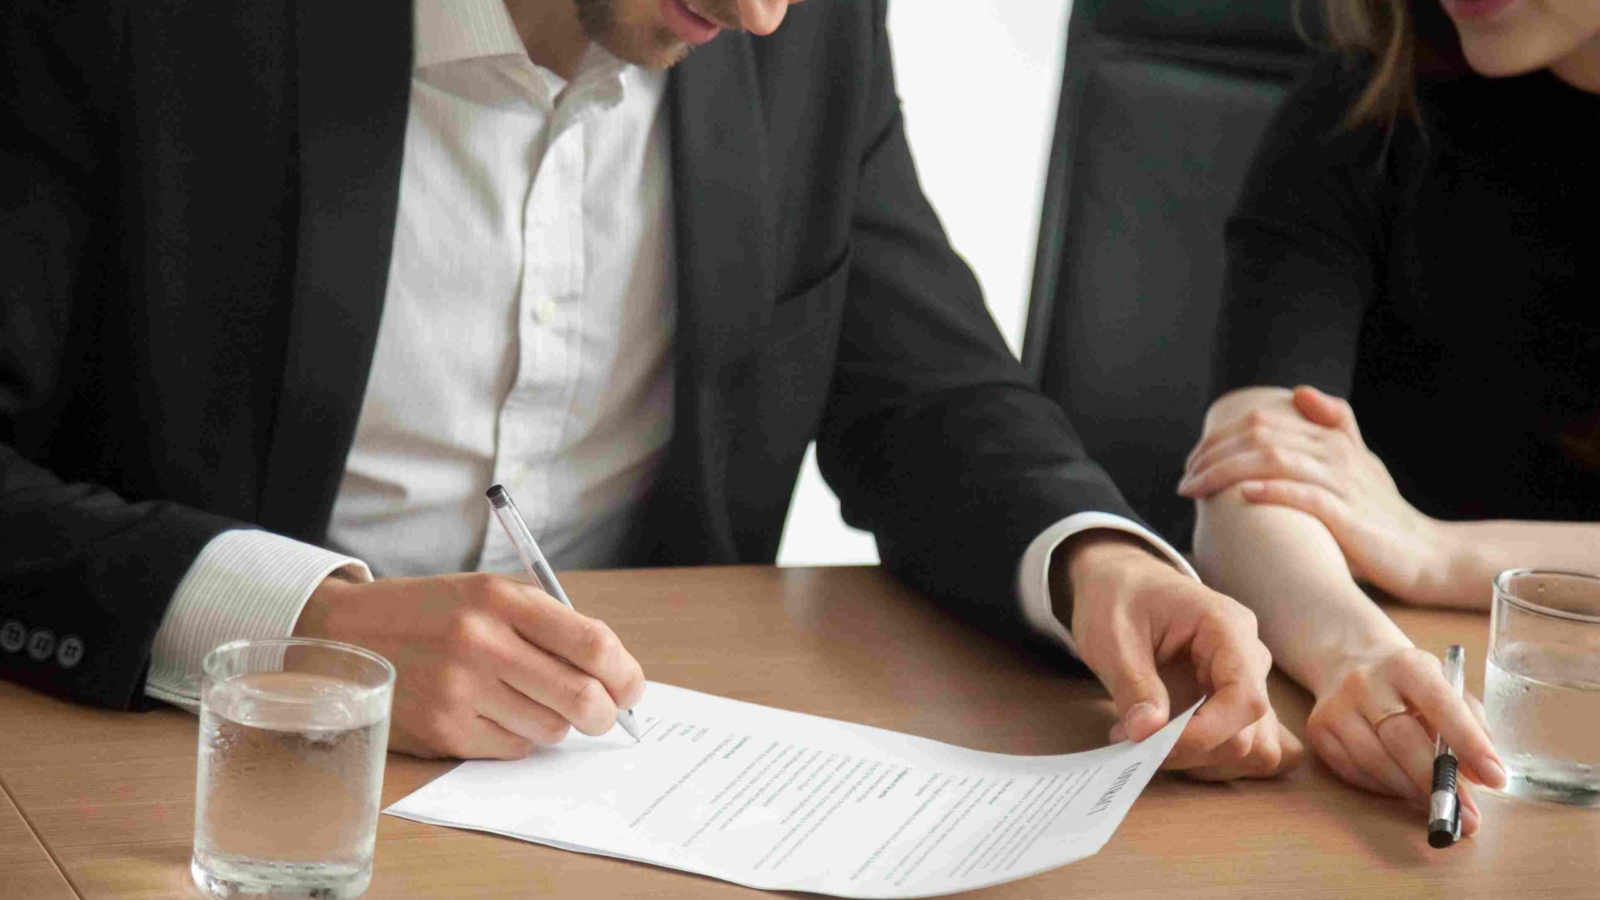 satisfied-smiling-businessman-suit-signing-contract-meeting-concept_11zon